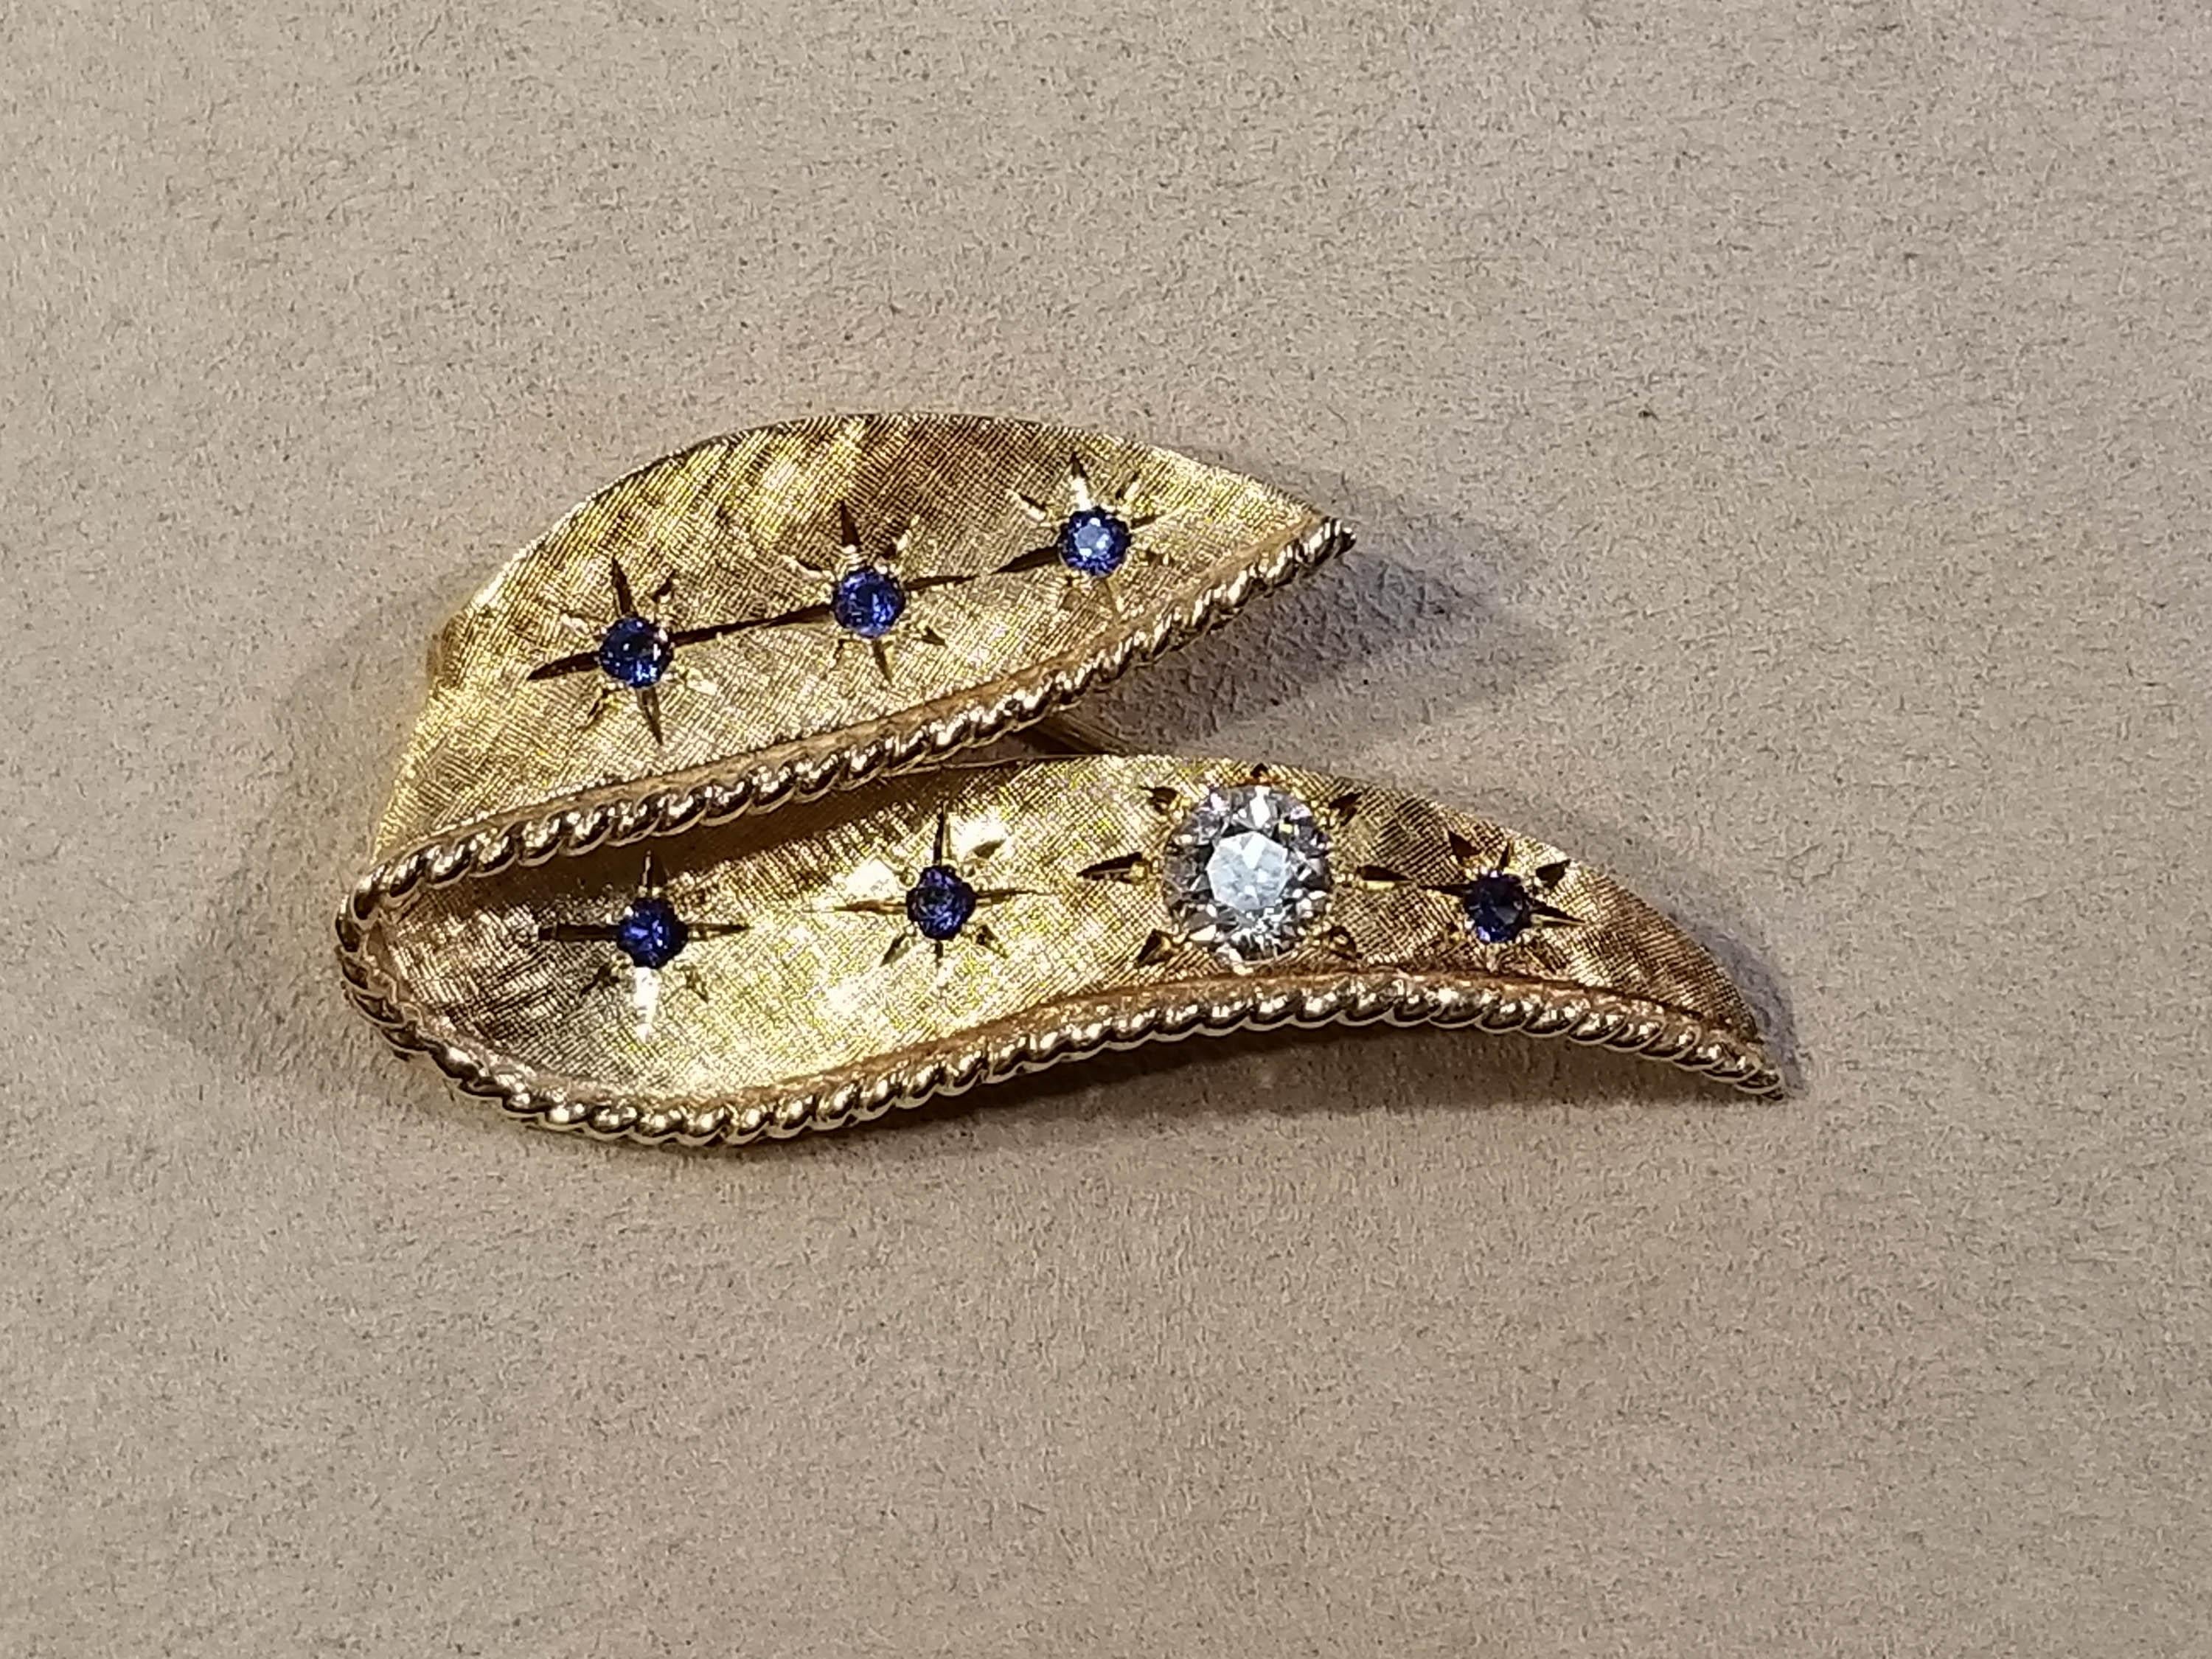 14k y/g Sapphire & Diamond Brooch.

Diamond: .50 ct J/K in color and an SI in clarity.

1 5/8 inches long, 11/16 inches tall at highest point. 